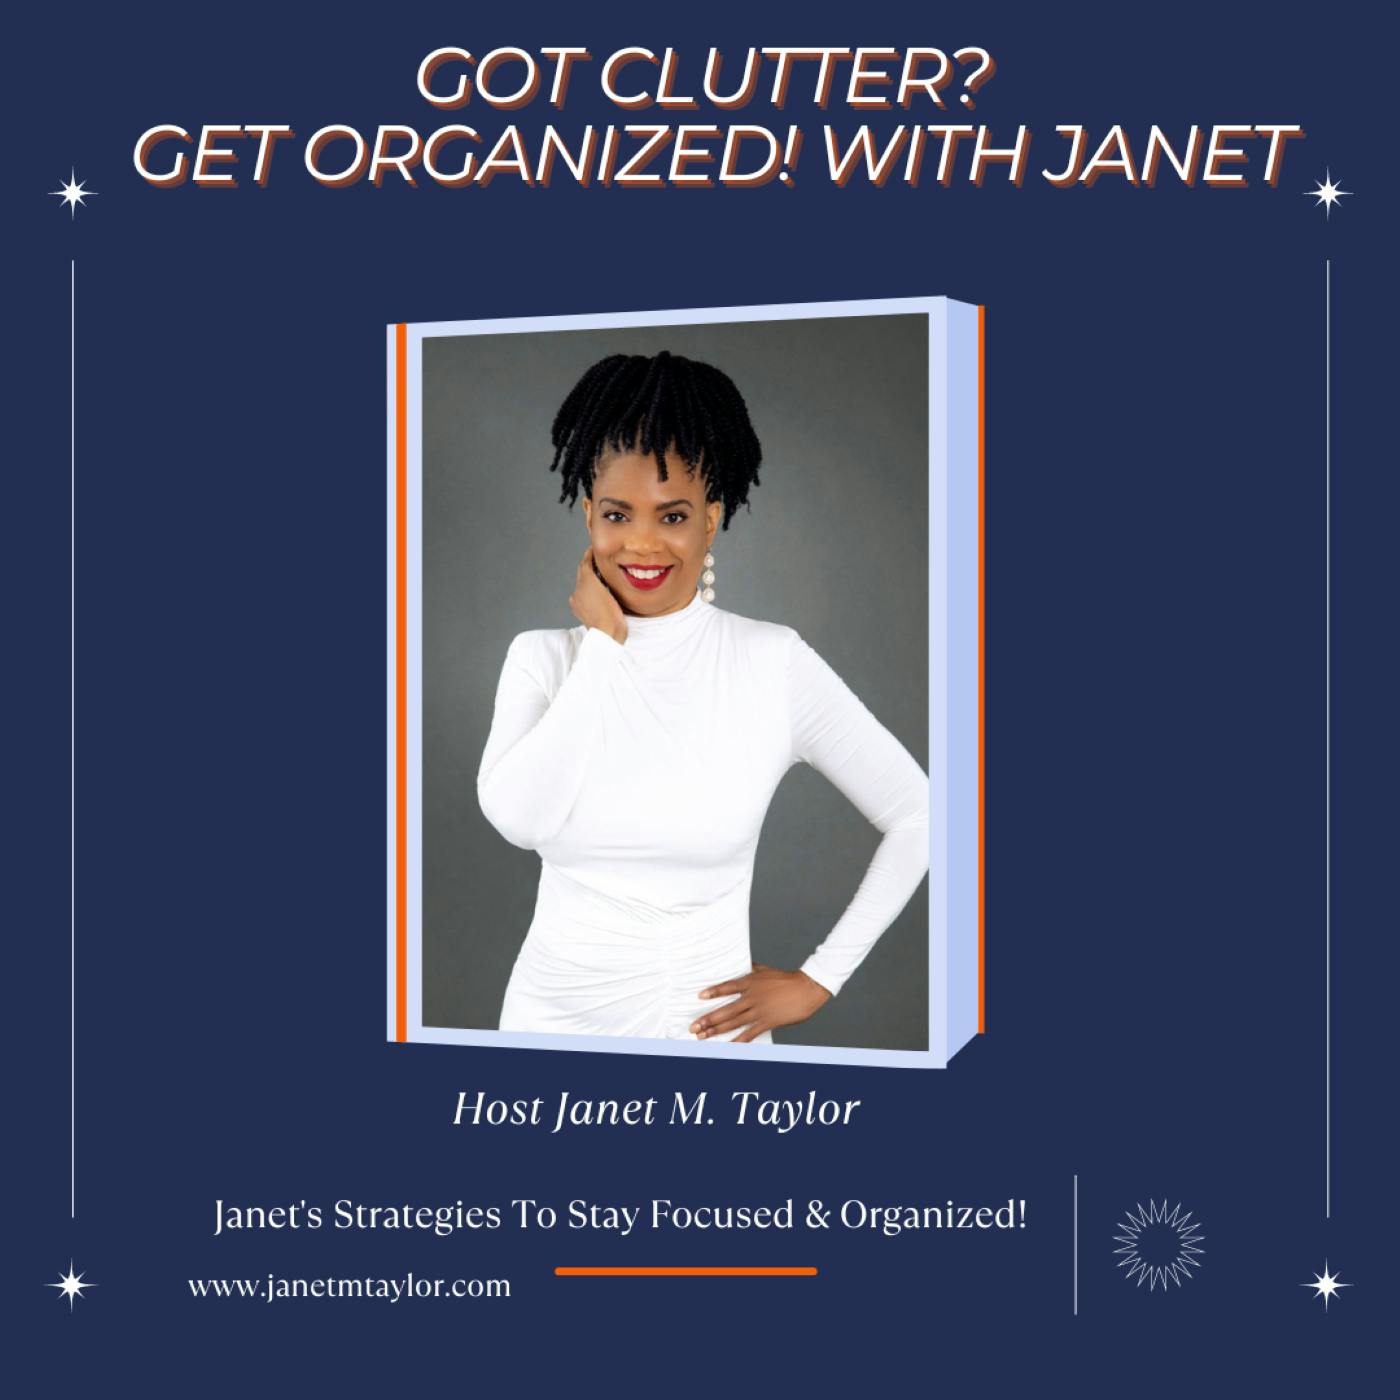 Janet's Strategies To Stay Focused and Organized!